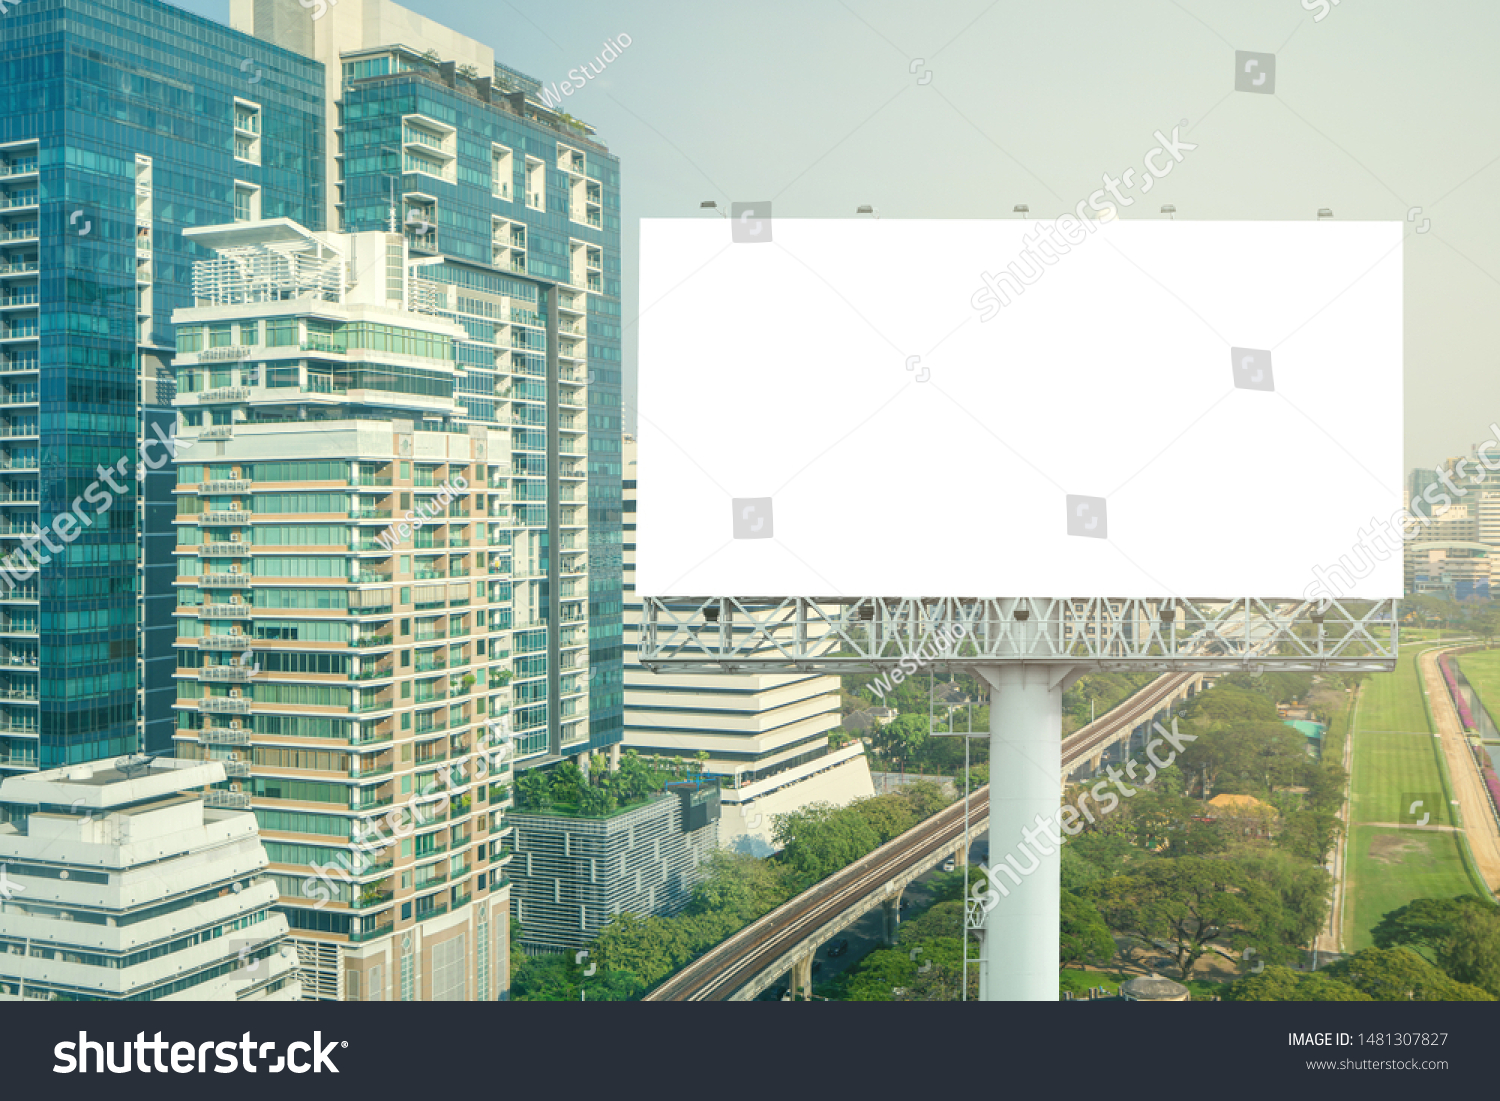 billboard or advertising poster on building for advertisement concept background. #1481307827